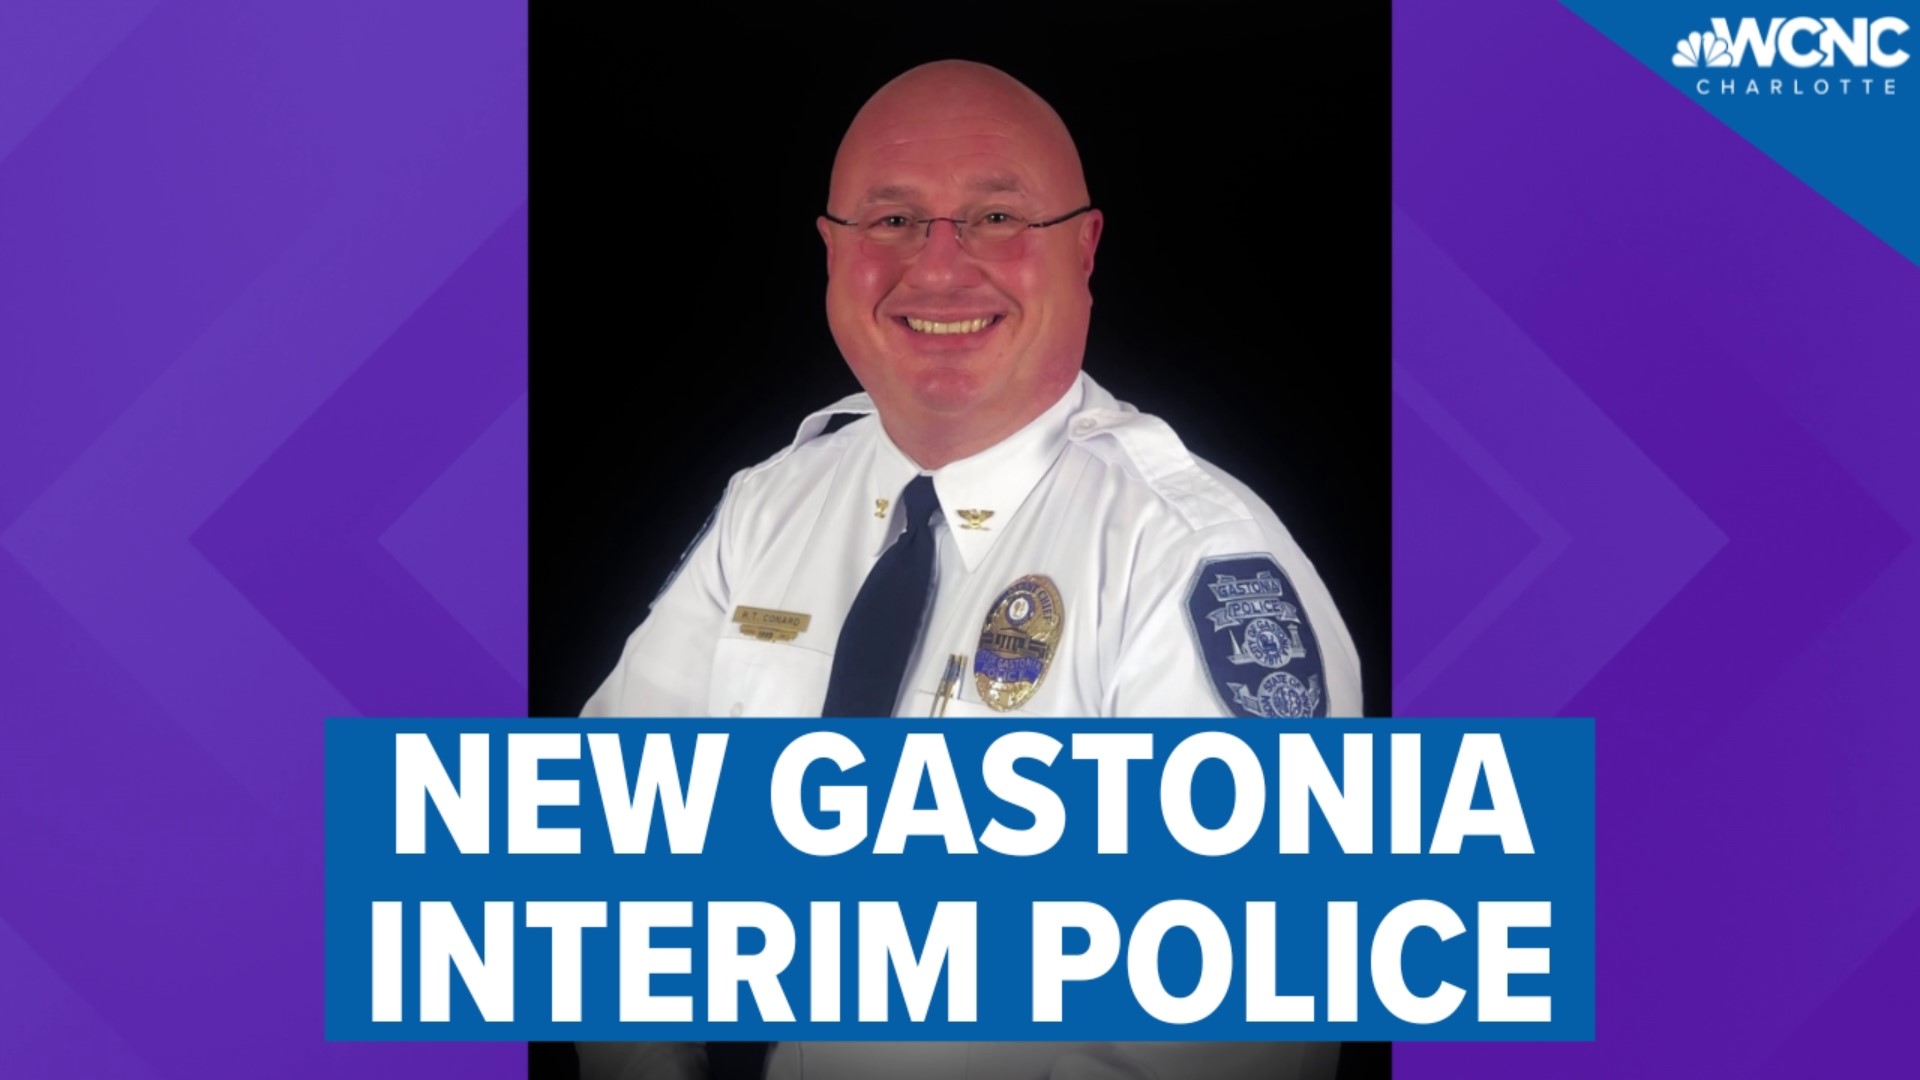 Trent Conrad has been named the new Gastonia interim police chief.